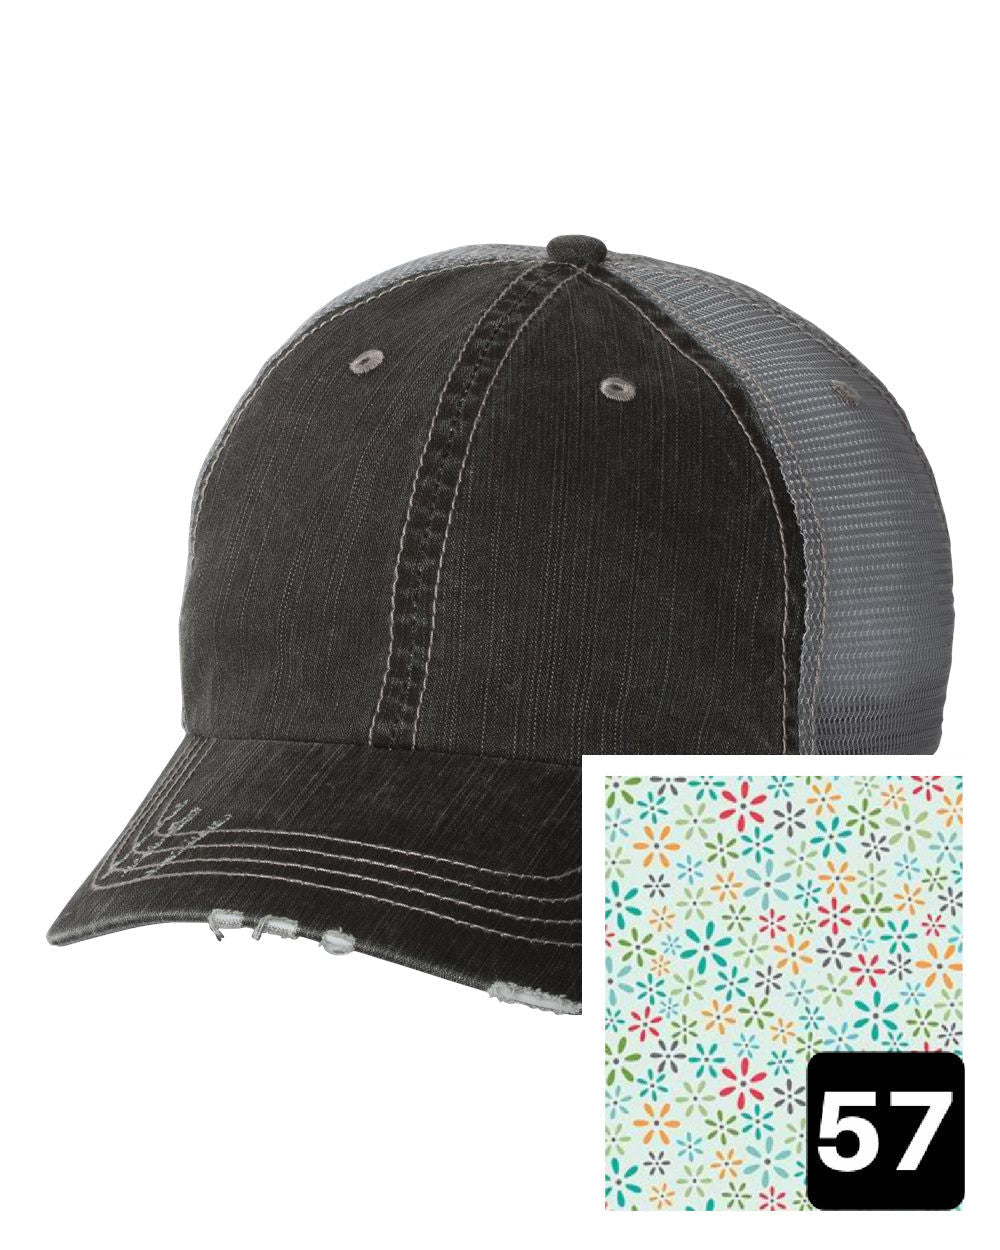 gray distressed trucker hat with white daisy on yellow fabric state of Kentucky